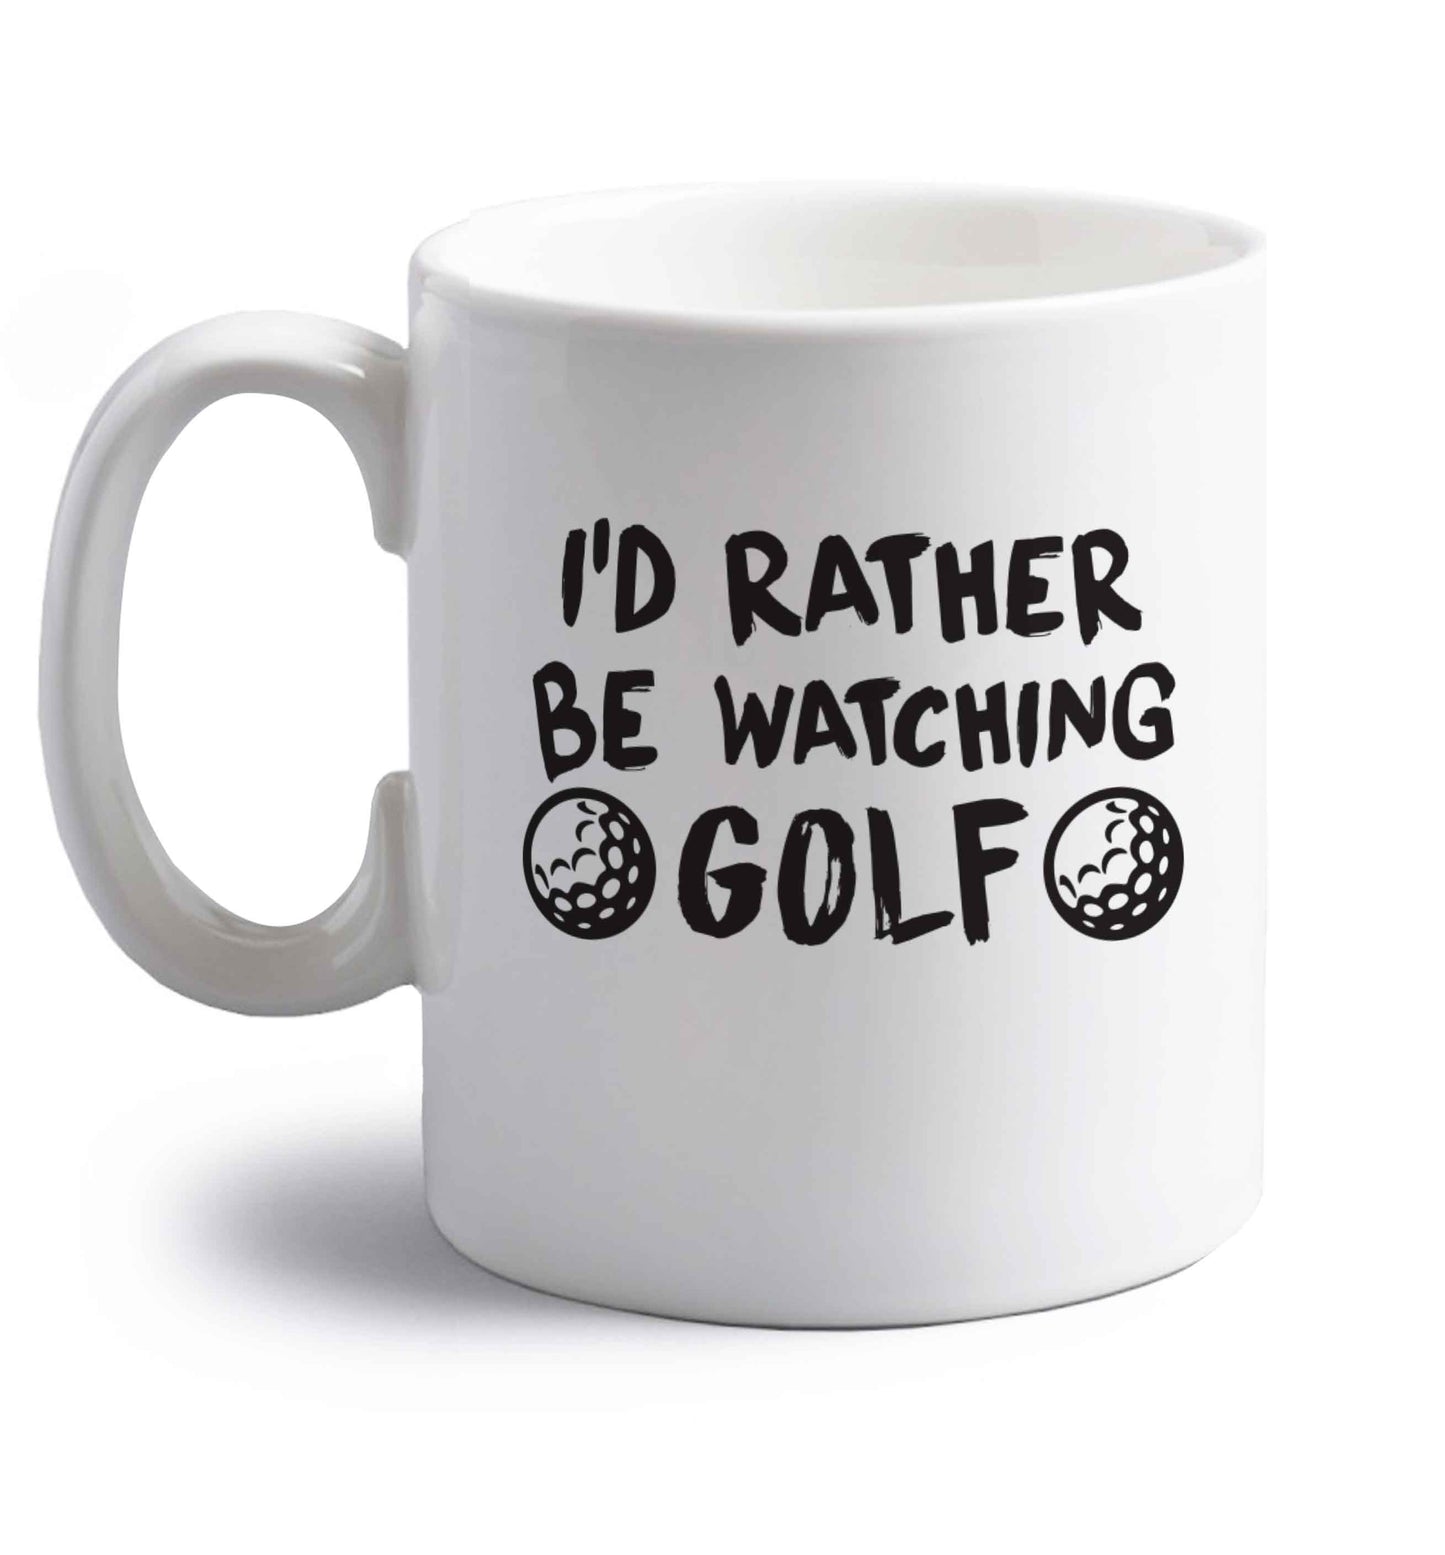 I'd rather be watching golf right handed white ceramic mug 